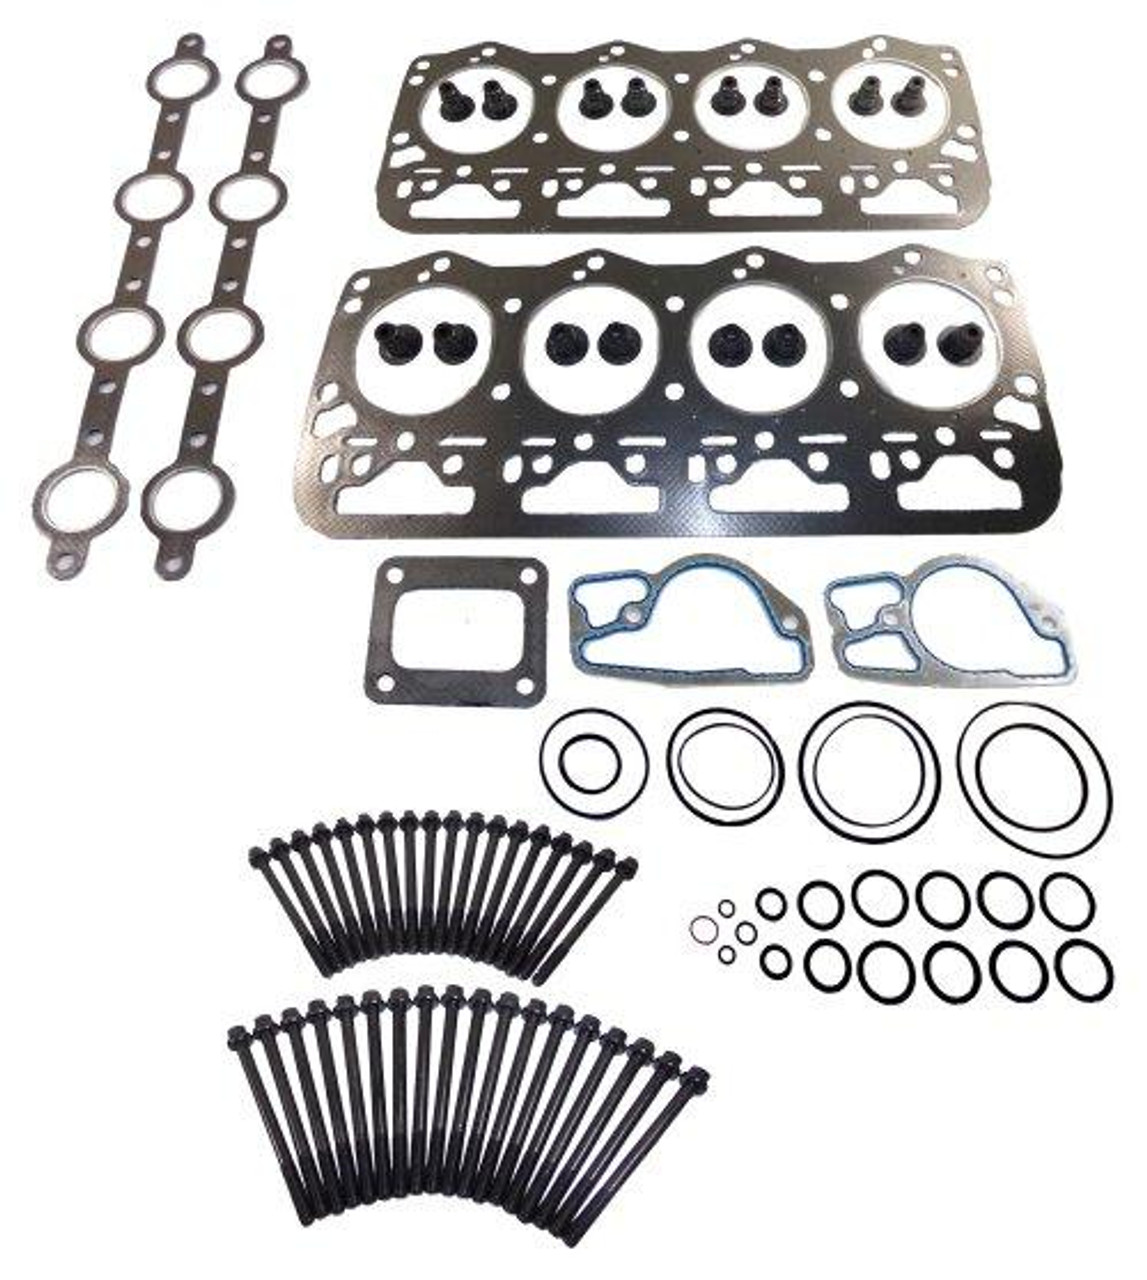 Head Gasket Set with Head Bolt Kit - 2000 Ford E-350 Super Duty 7.3L Engine Parts # HGB4200ZE15